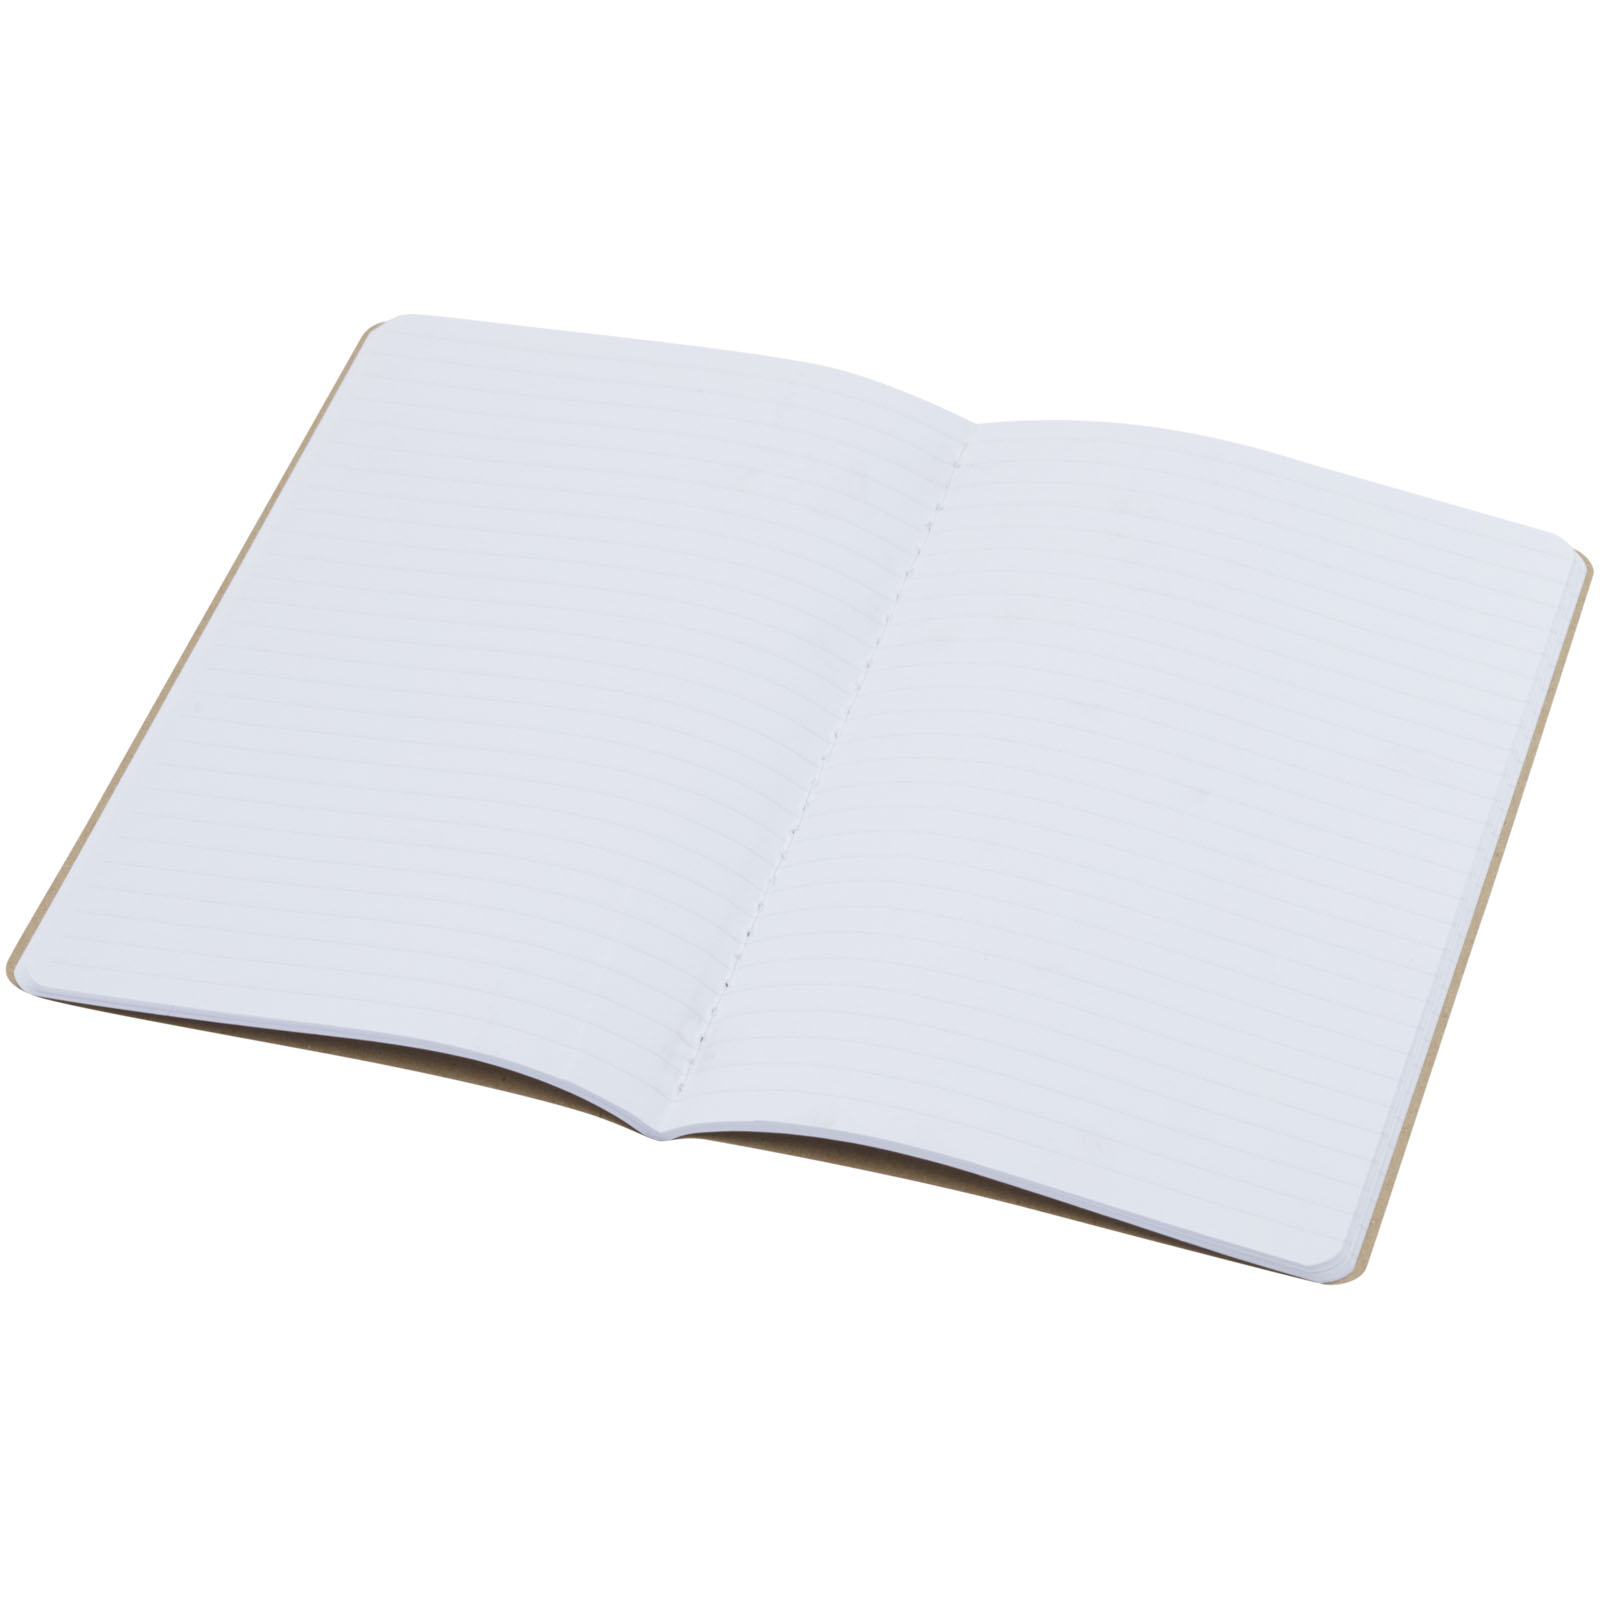 Advertising Notebooks - Gianna recycled cardboard notebook - 3